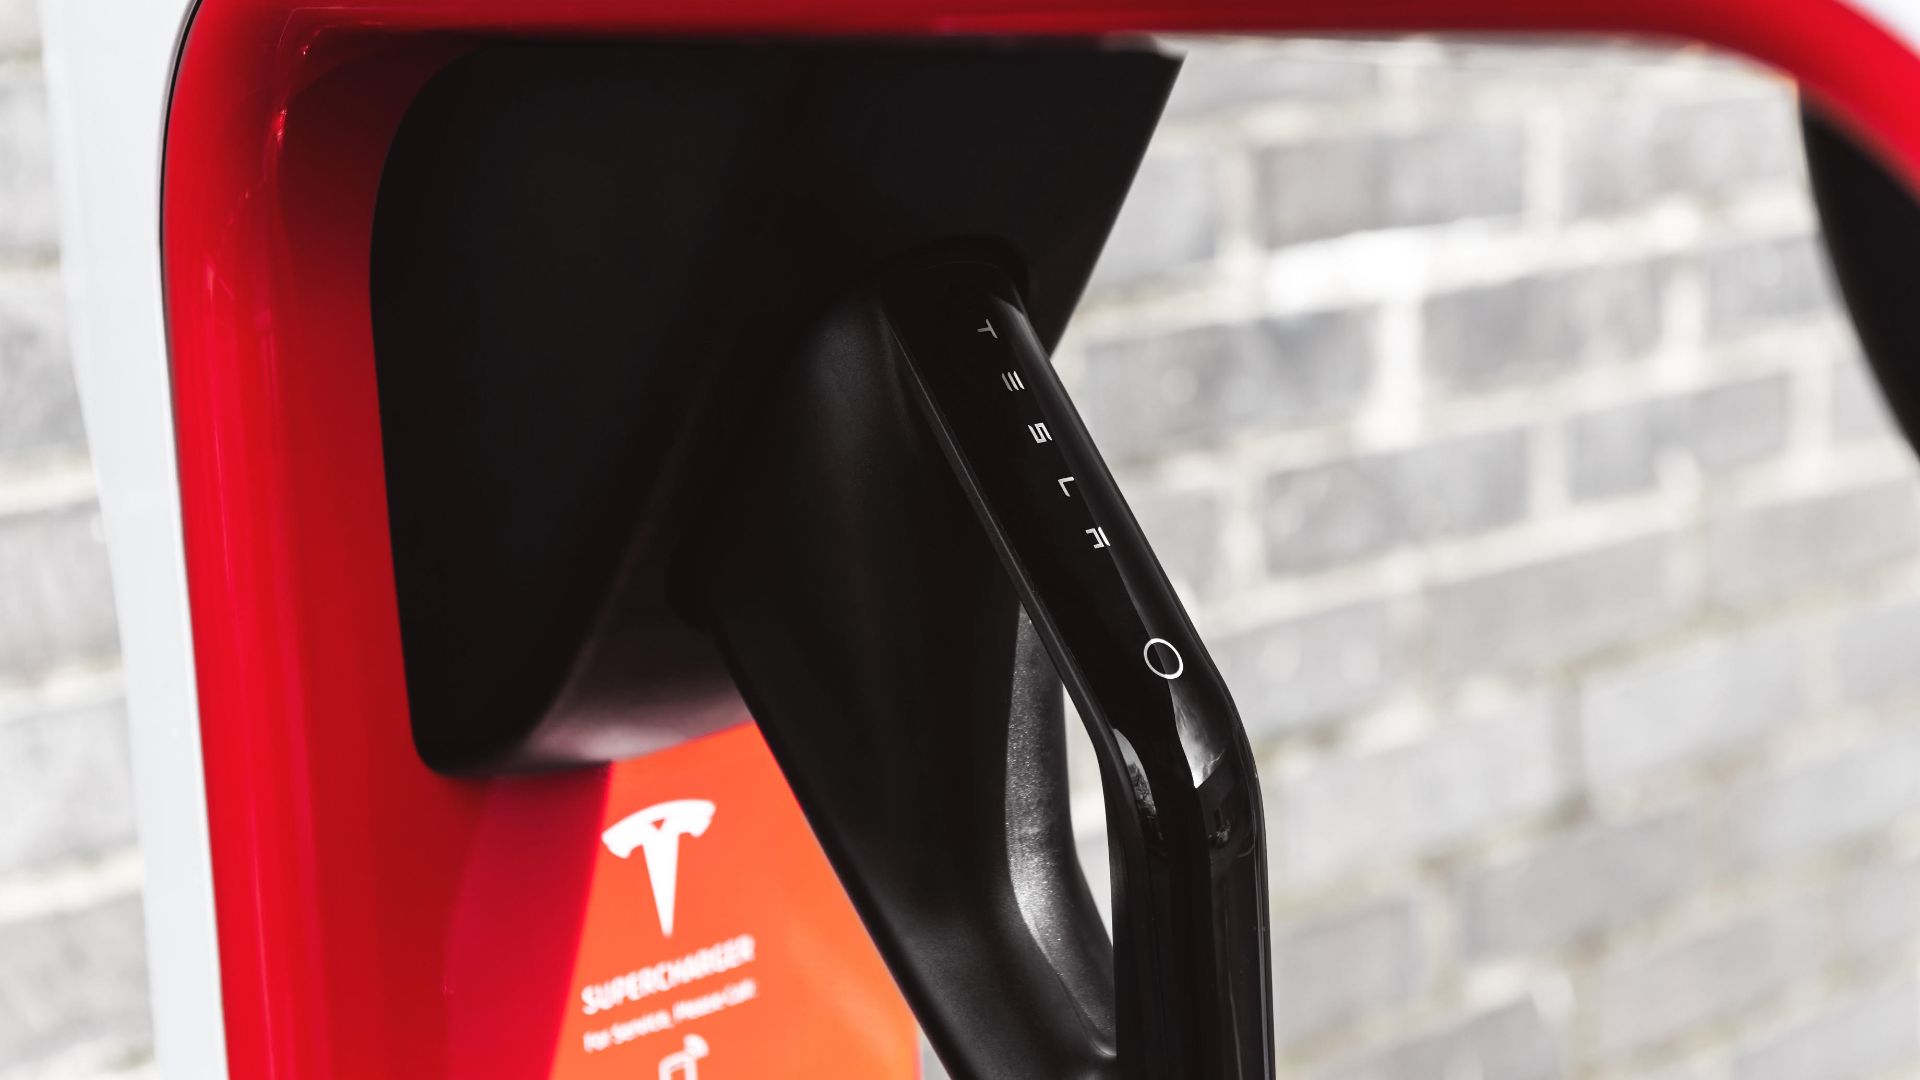 As promised by Elon Musk, Tesla launches its first European V3 Supercharger in Q4, which becomes the 500th Supercharger in Europe!